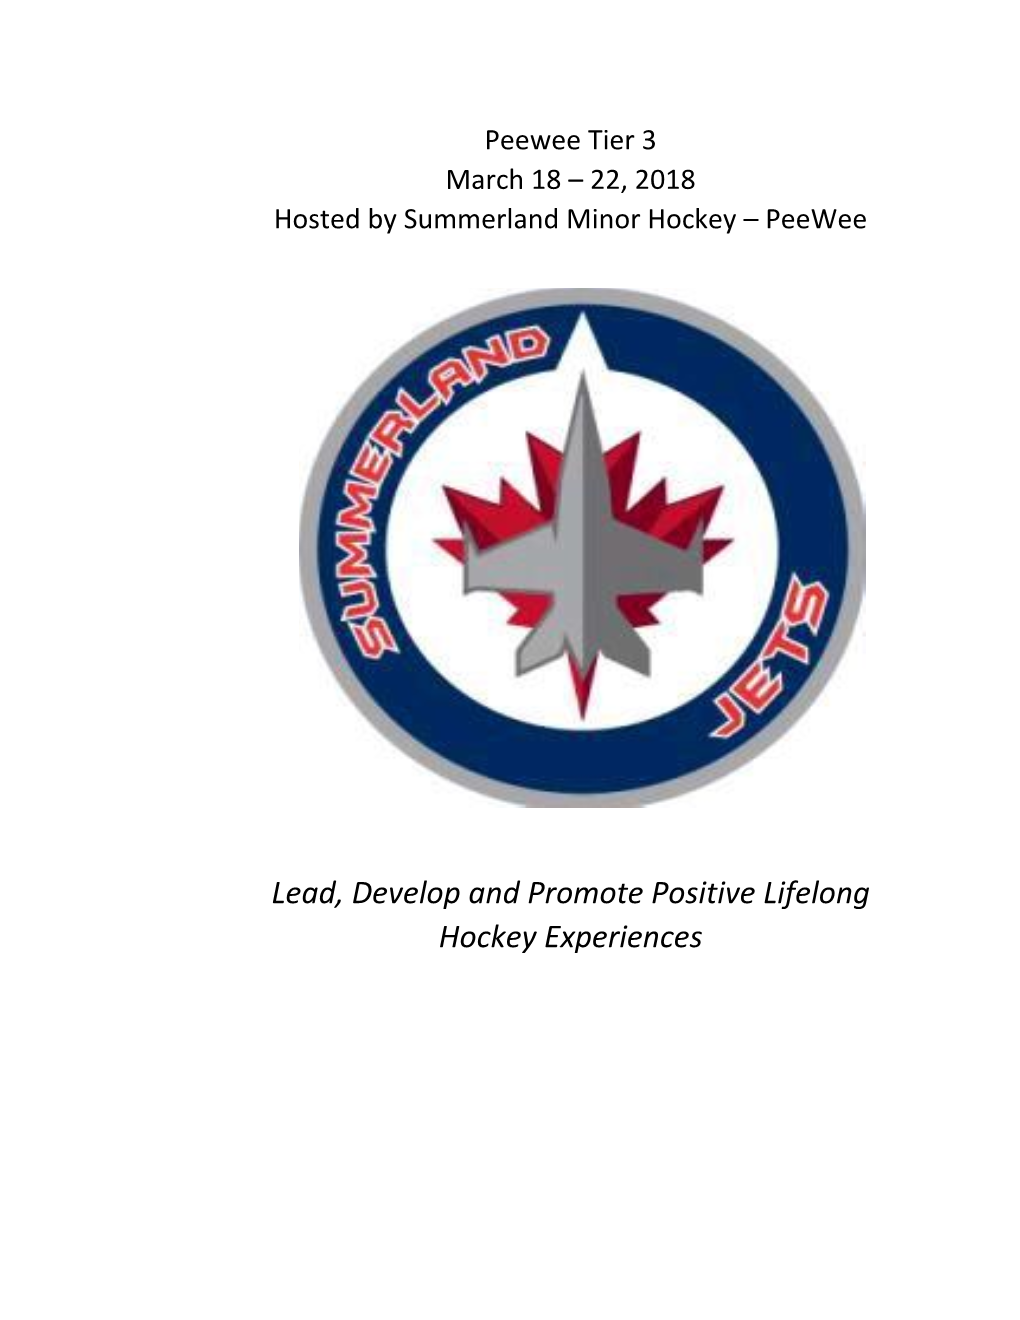 Lead, Develop and Promote Positive Lifelong Hockey Experiences